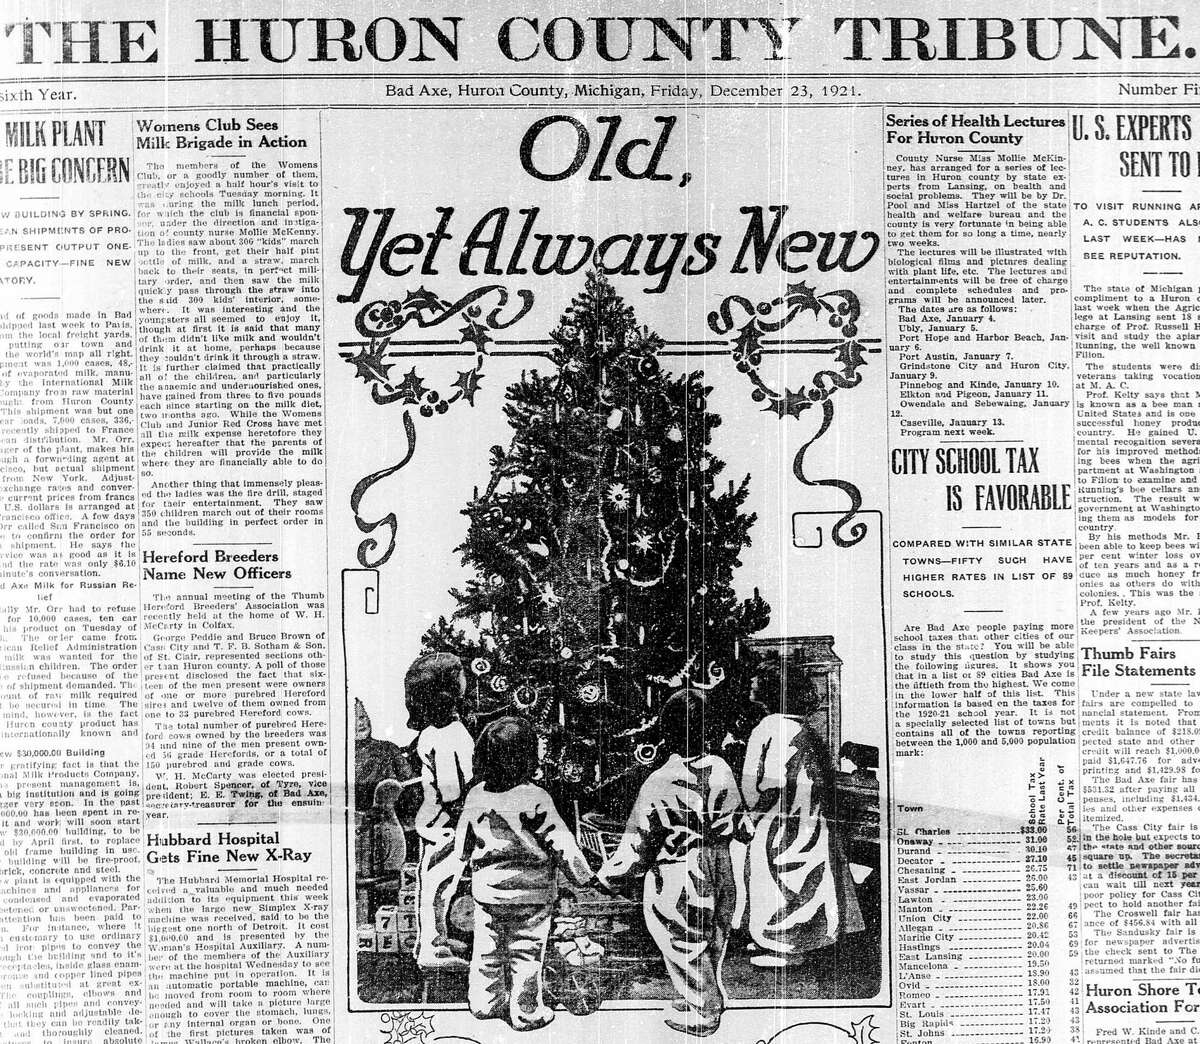 Advertisements and the front page of The Huron County Tribune's Dec. 23, 1921, edition show a great deal — but not everything — involving the Christmas holiday has changed over the past 100 years.